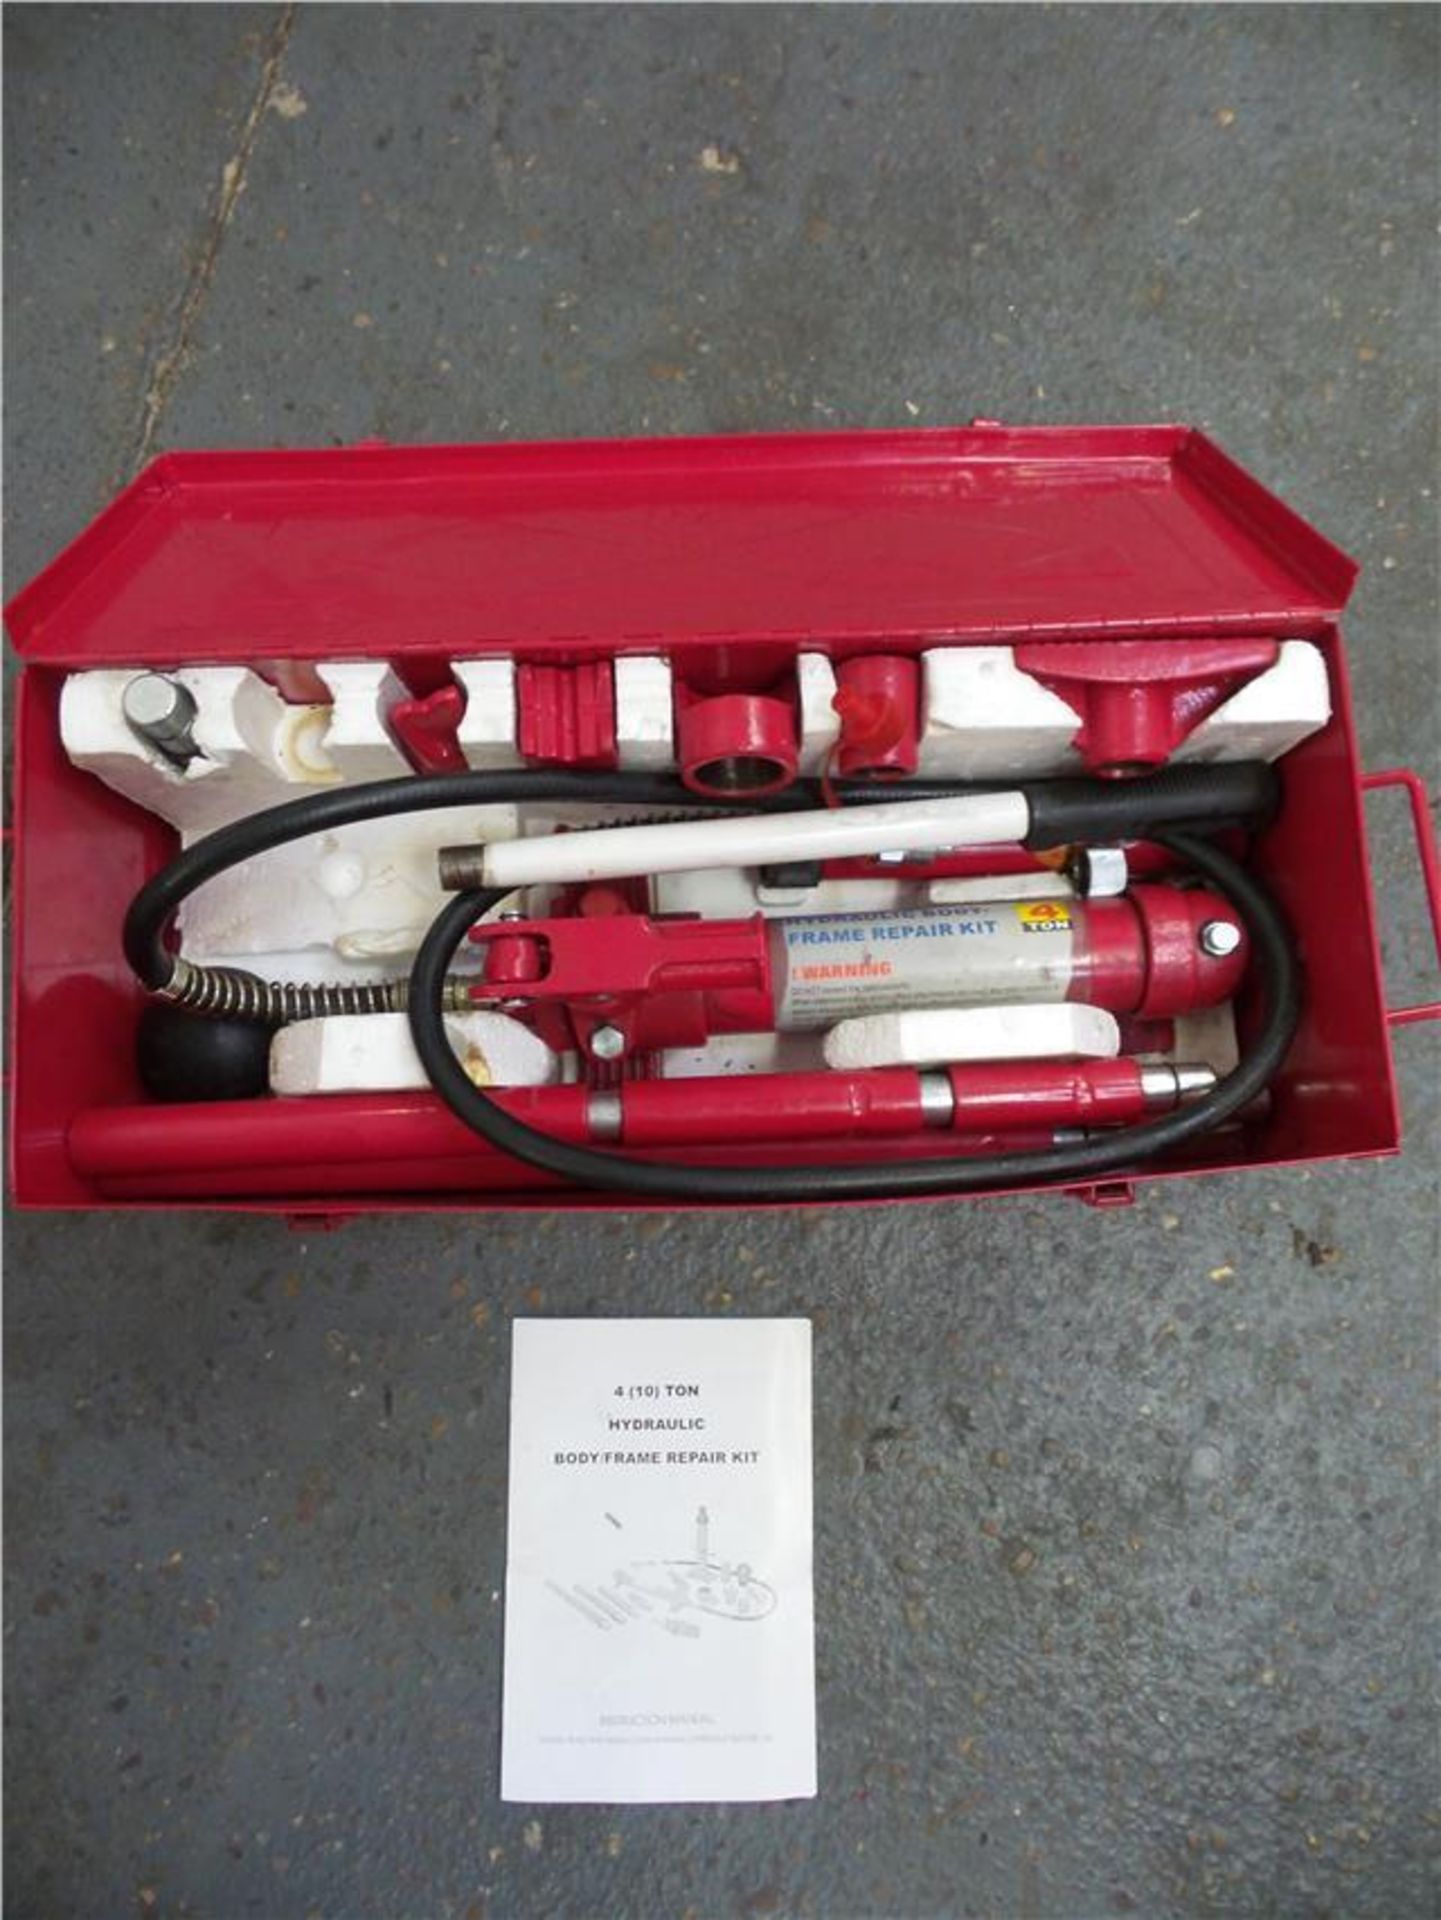 4 Ton Body Repair Kit (WORKING 0877) ** Ex-Sample **£35.00 + Vat, Delivery Charge Can be added for